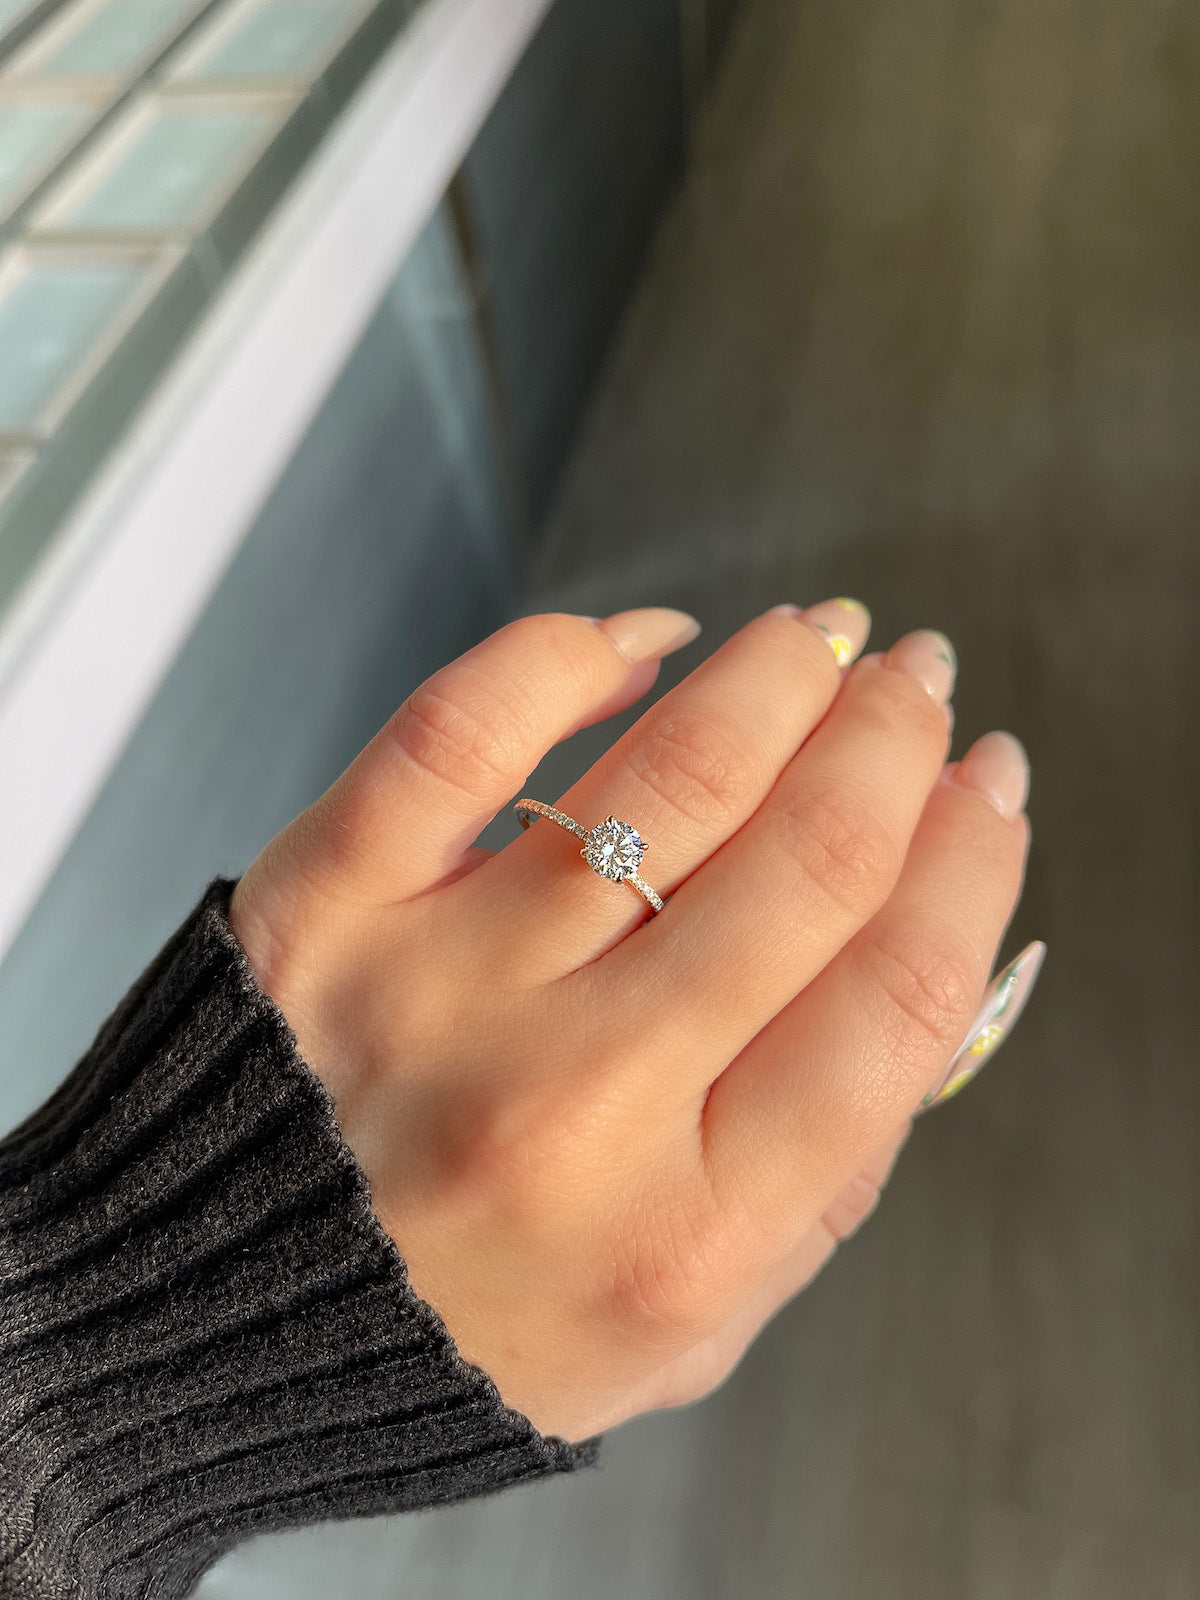 Load image into Gallery viewer, Engagement Ring Wednesday | 0.70 Round Brilliant Diamond - Happy Jewelers Fine Jewelry Lifetime Warranty
